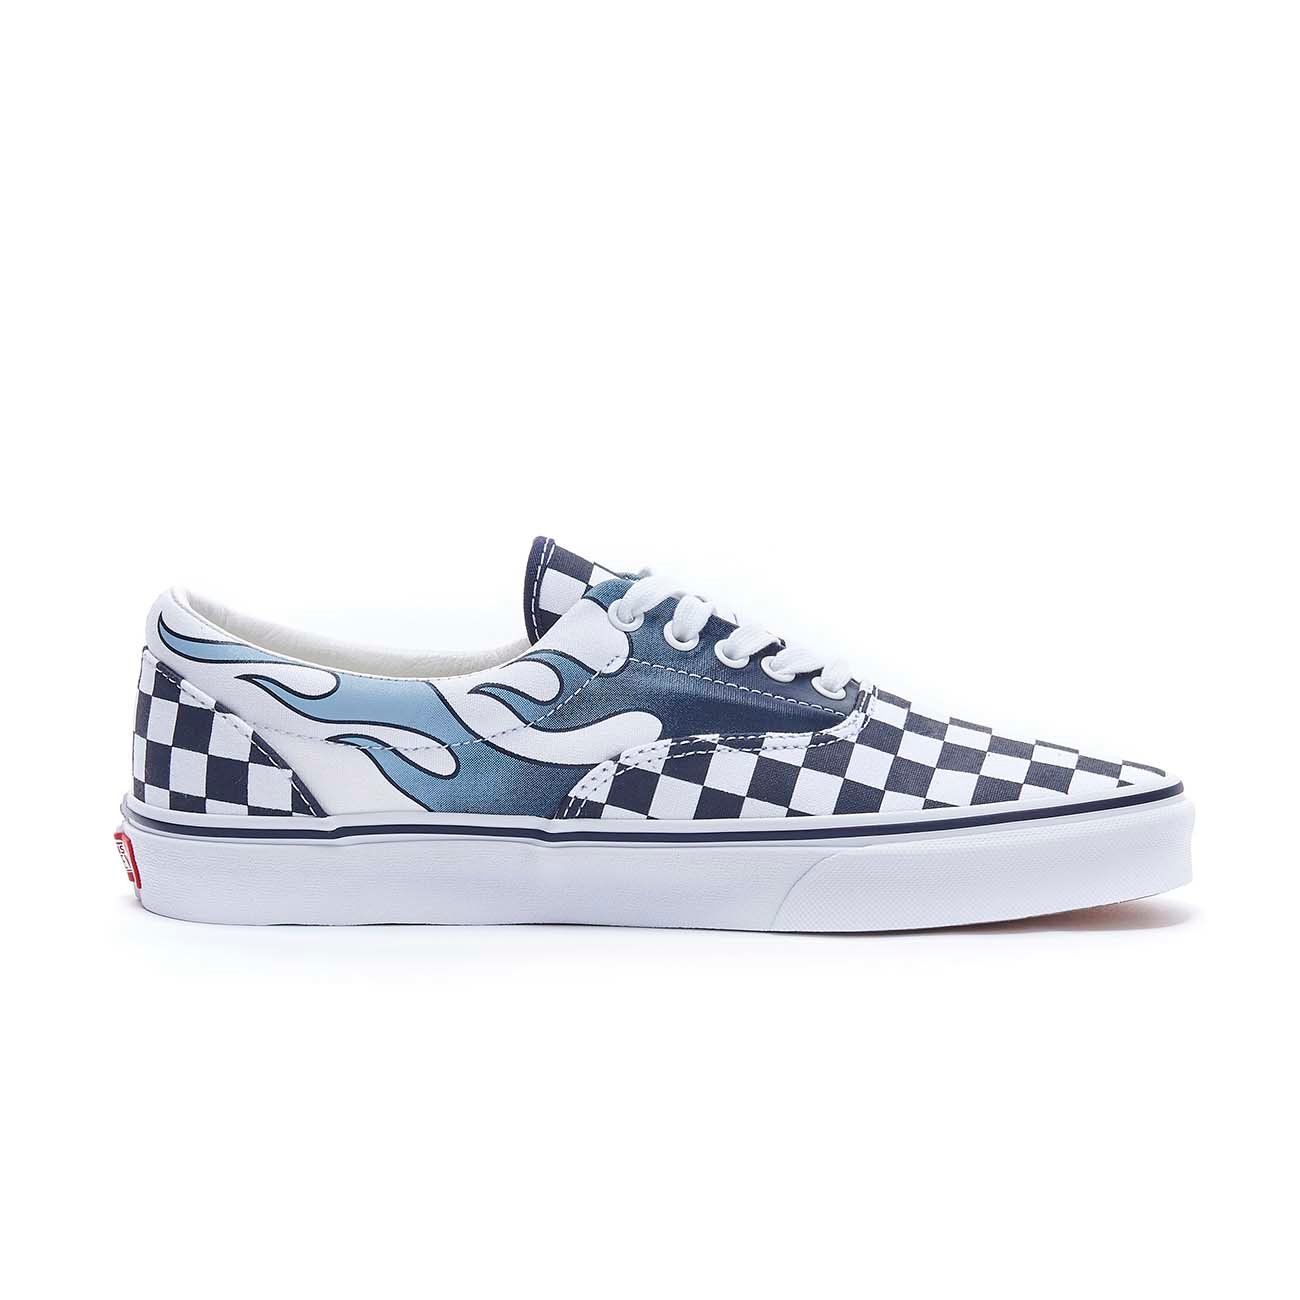 blue checkerboard vans with flames